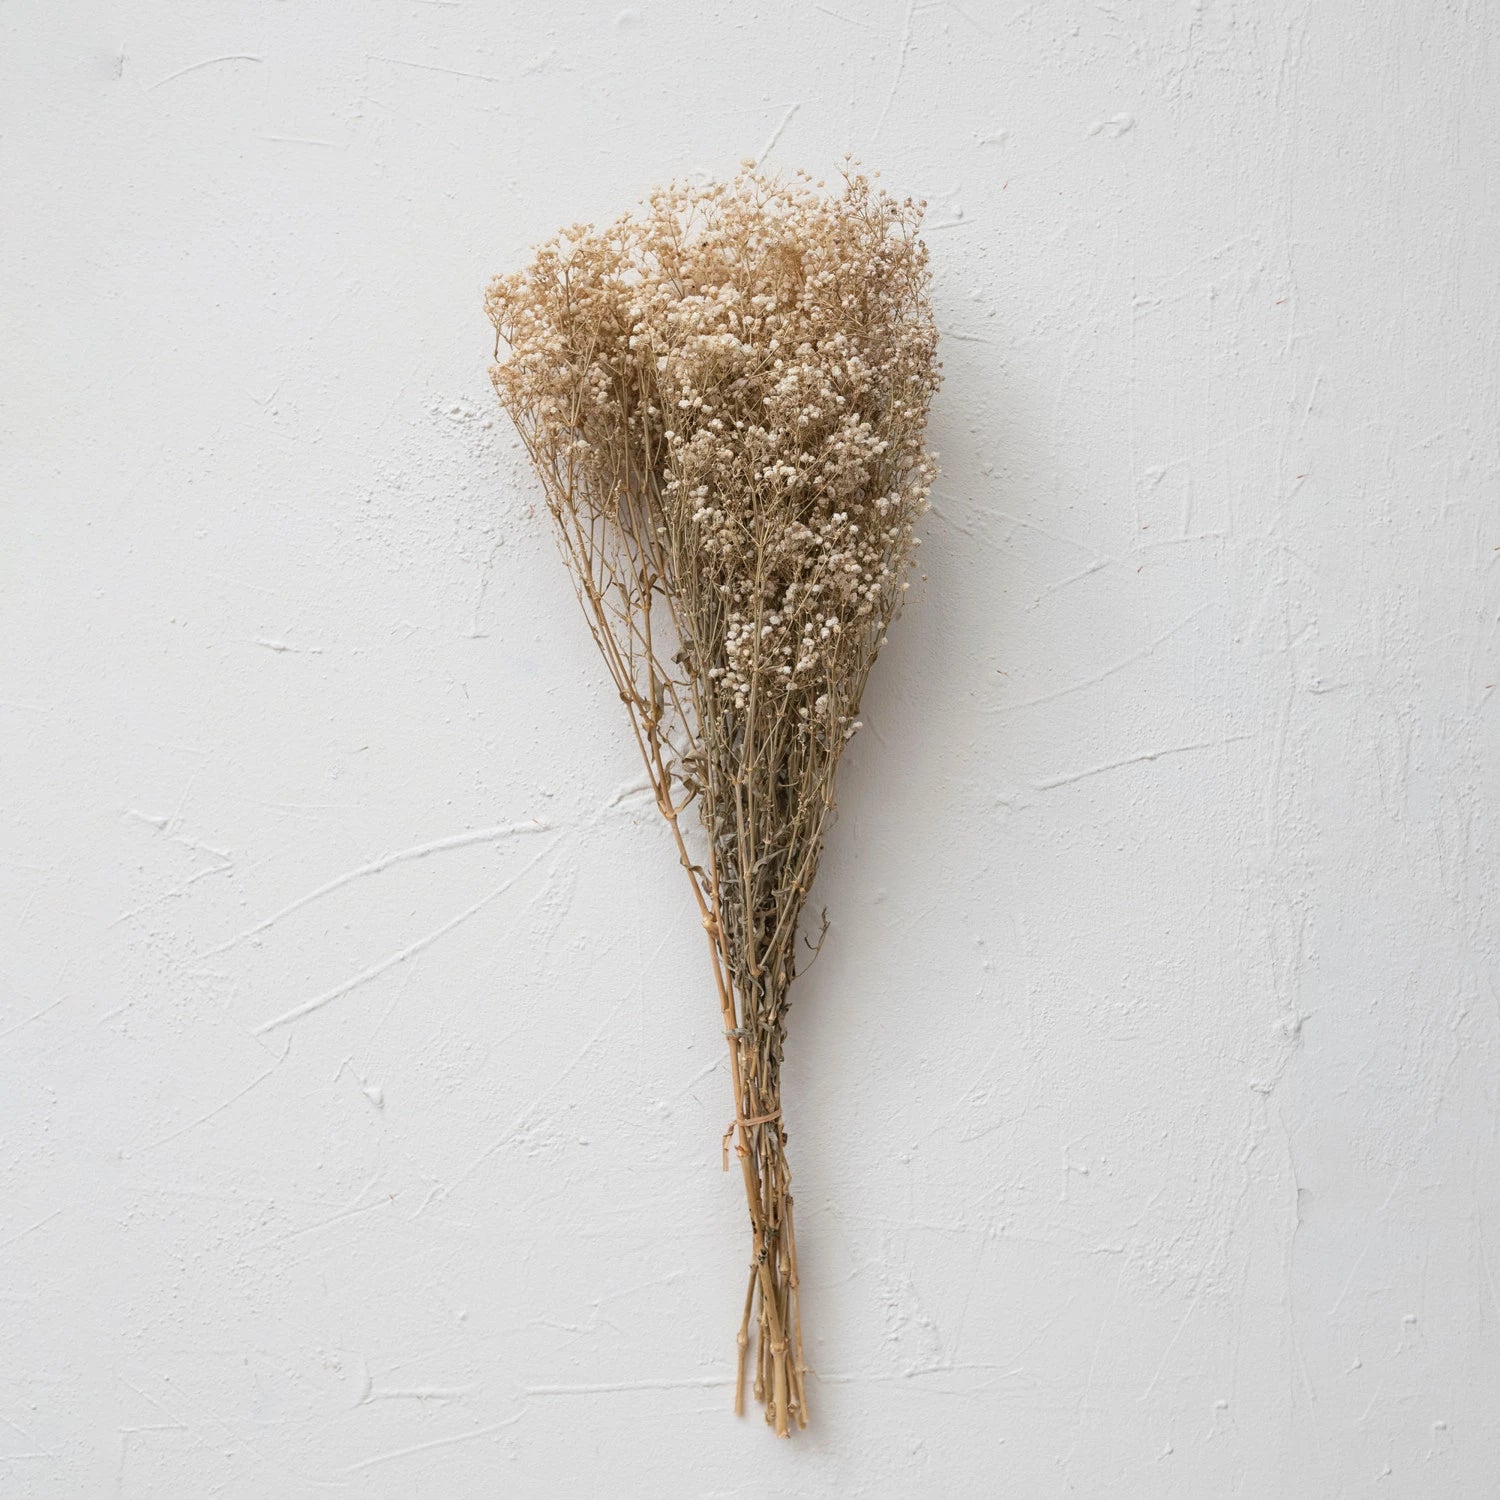 Dried baby's breath bunch in a natural hue tone.